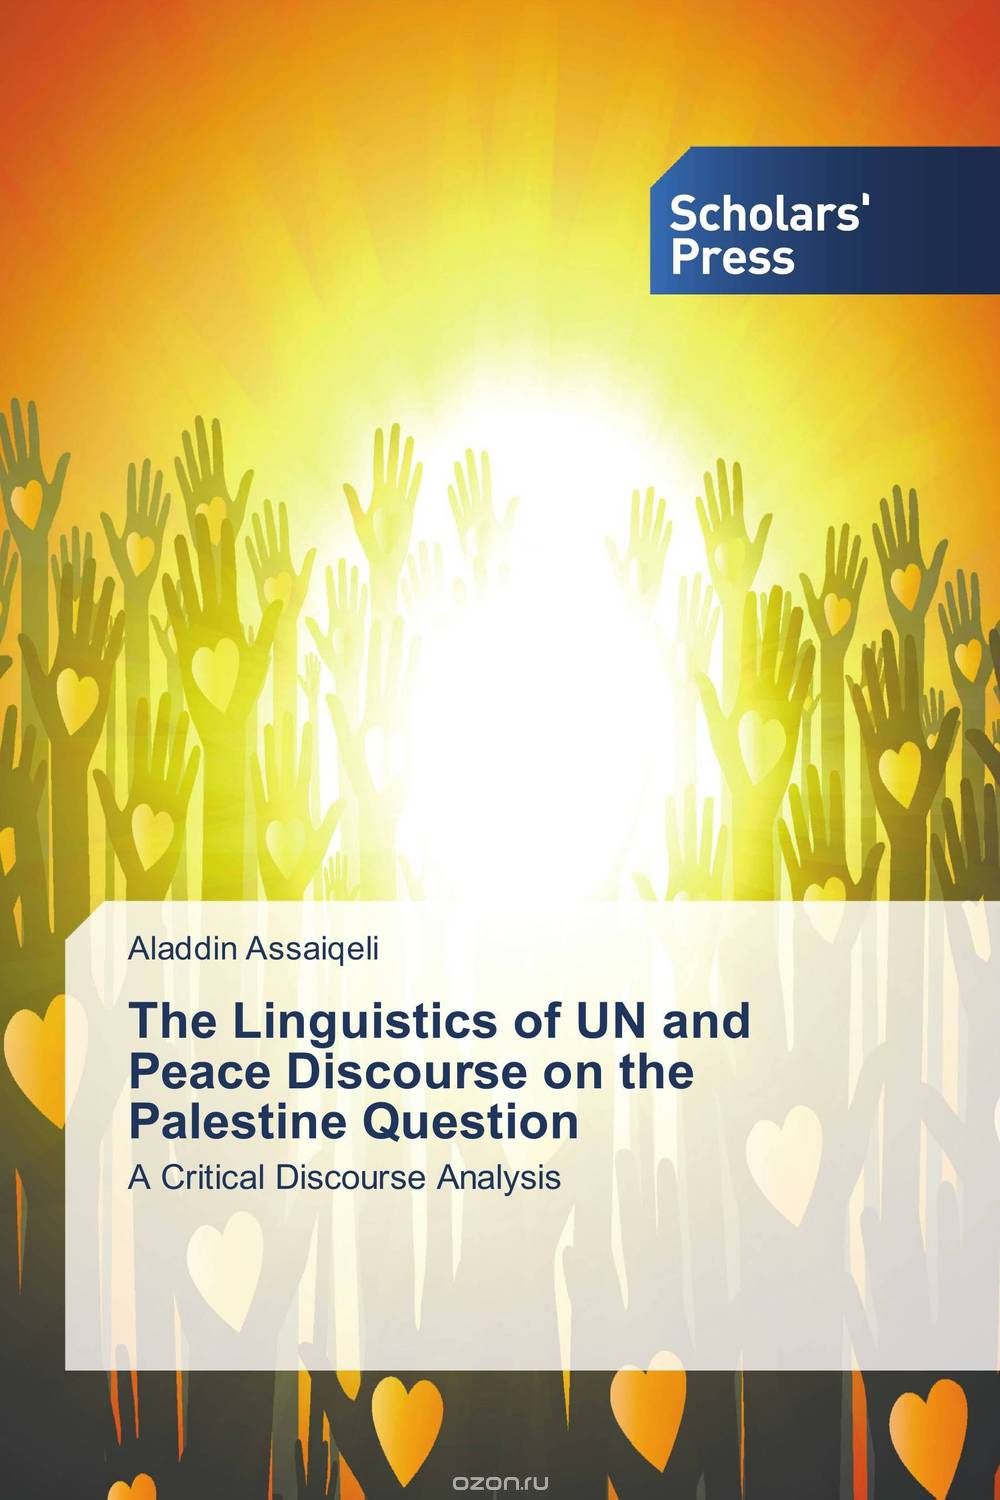 The Linguistics of UN and Peace Discourse on the Palestine Question